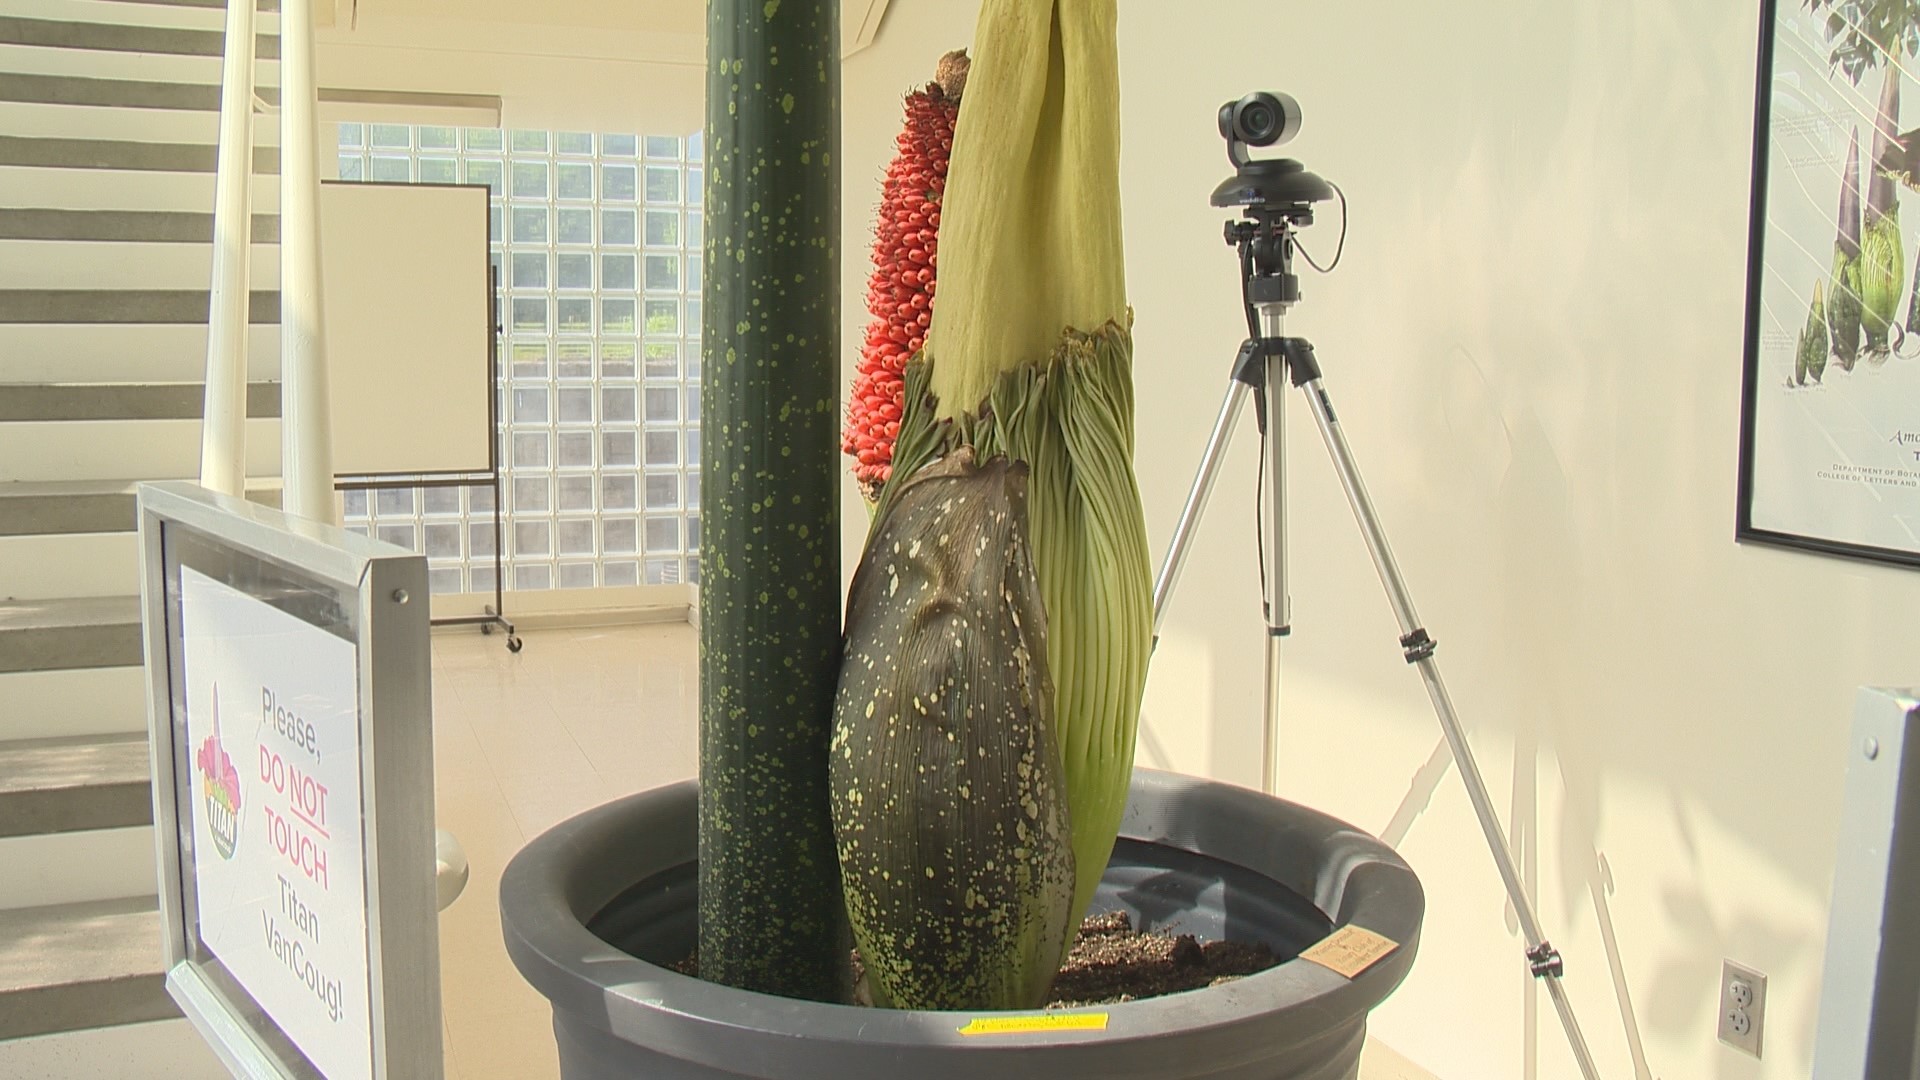 The corpse flower, named Titan VanCoug, will soon bloom for the third time. The first one came in 2019 after laying dormant for 17 years.